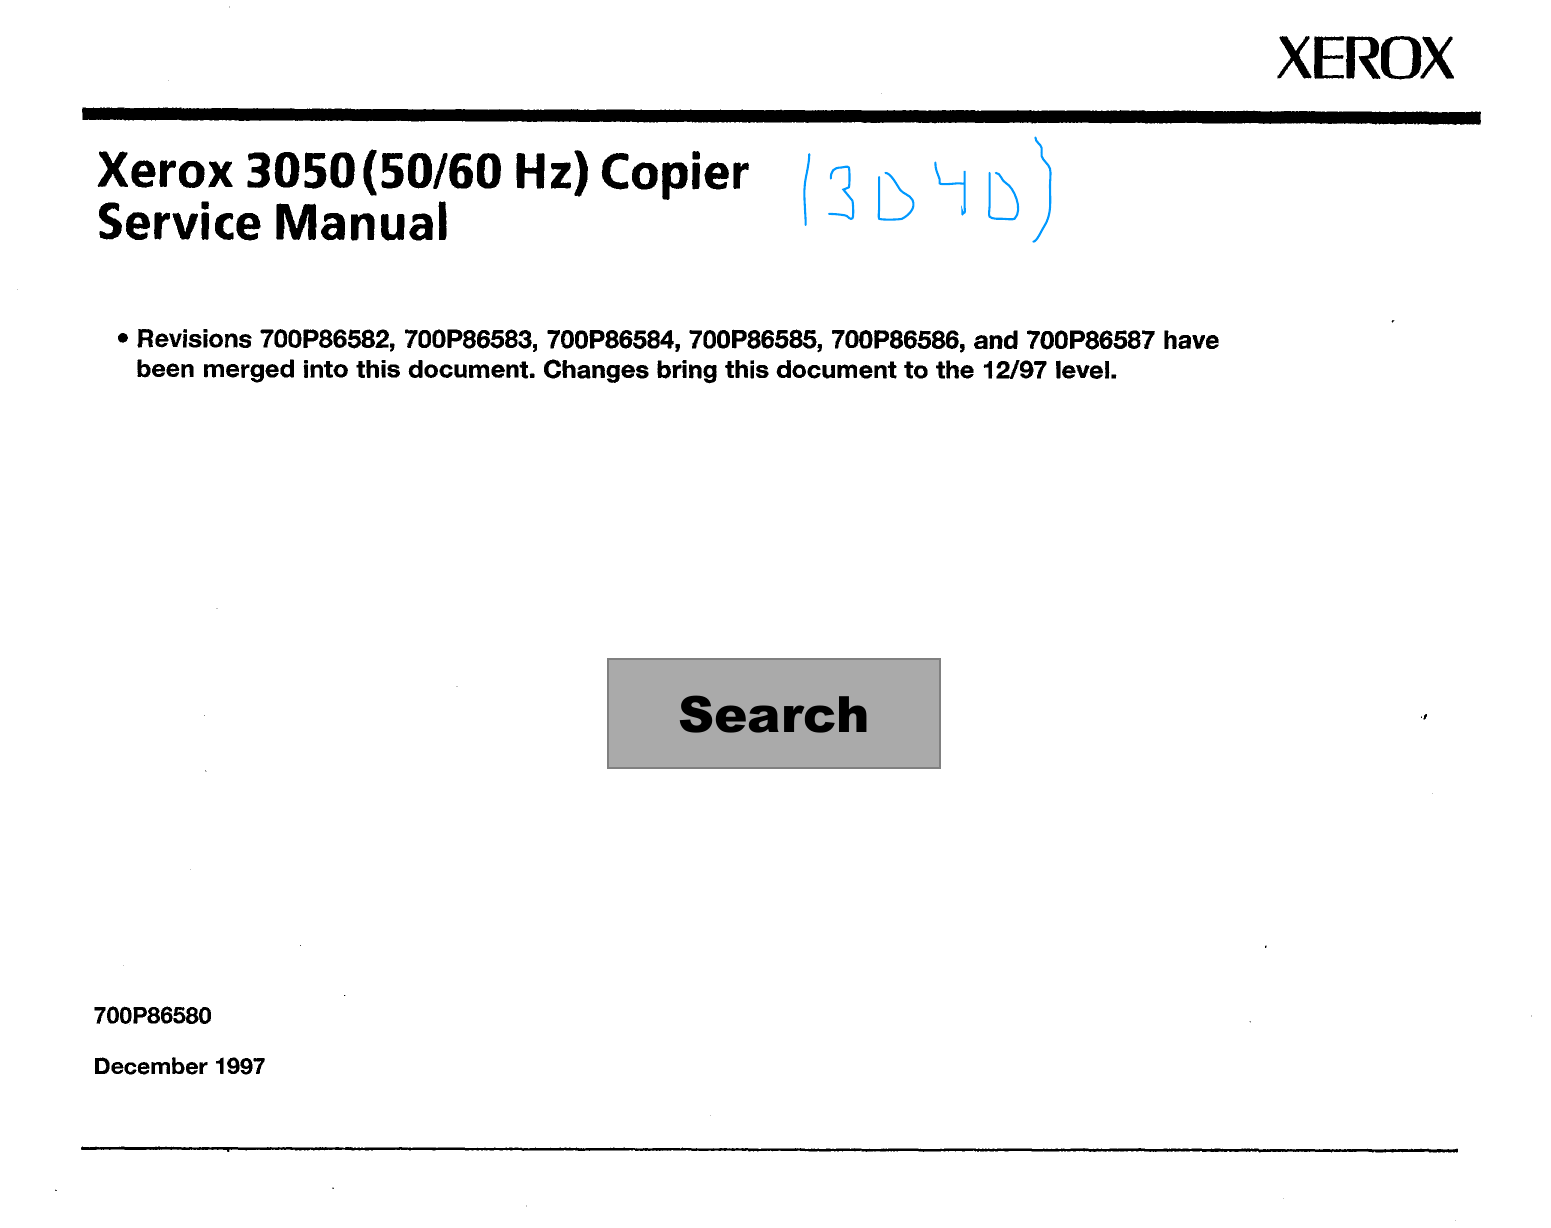 Xerox 3050 service manual Preview image 6